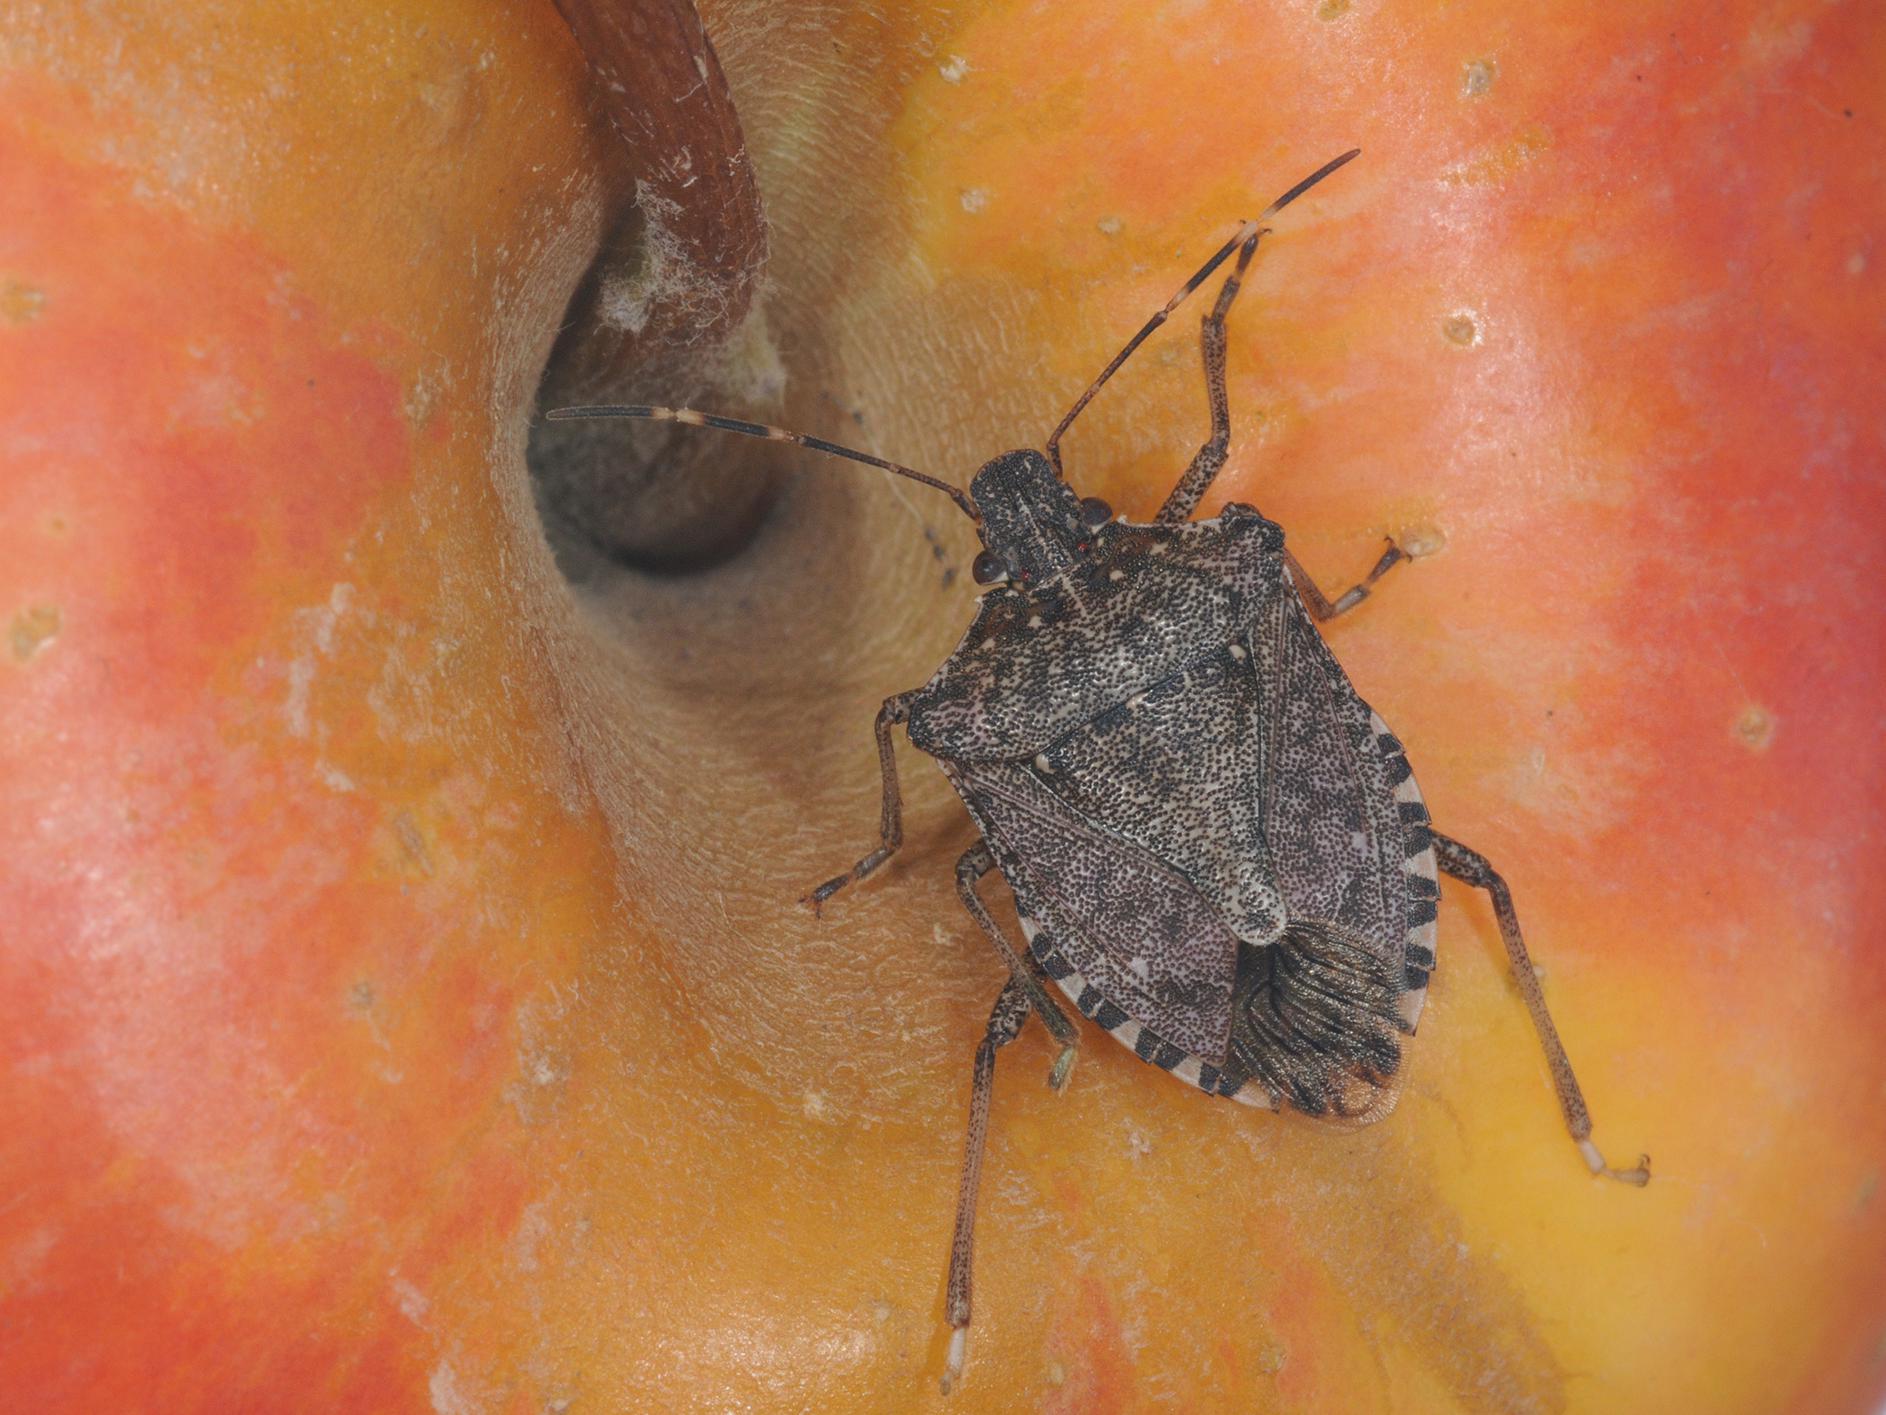 A brown marmorated stink bug with numerous small spots on its body and two white lines on its dark, brown antennae sits on top of a red and yellow apple.